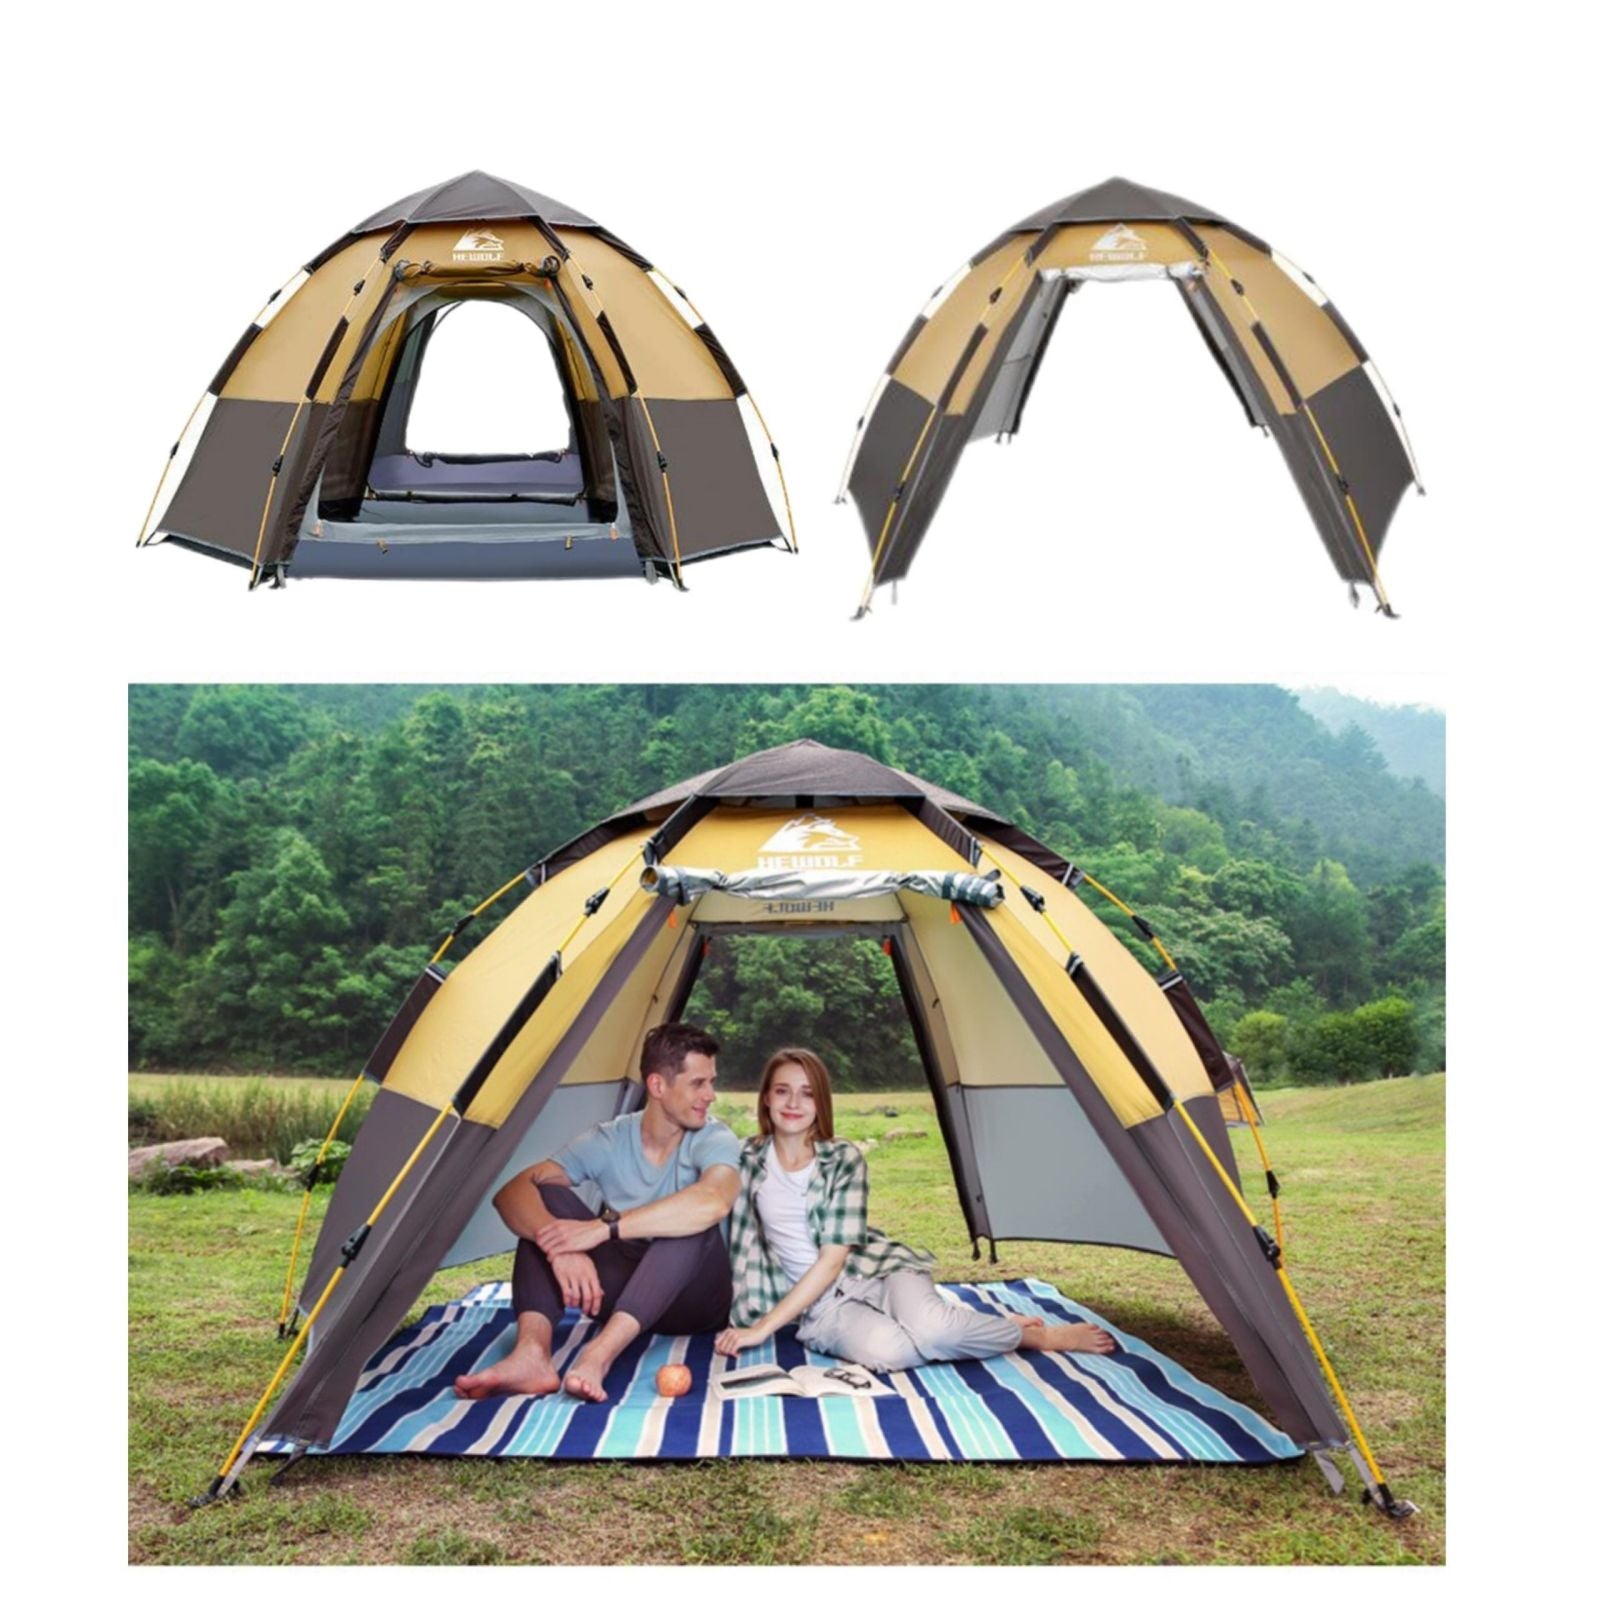 Waterproof Instant Camping Tent 4/5/6 Person Easy Quick Setup Dome Hexagonal Family Tents For Camping, Double Layer Flysheet Can Be Used As Beach Shelter - SILBERSHELL